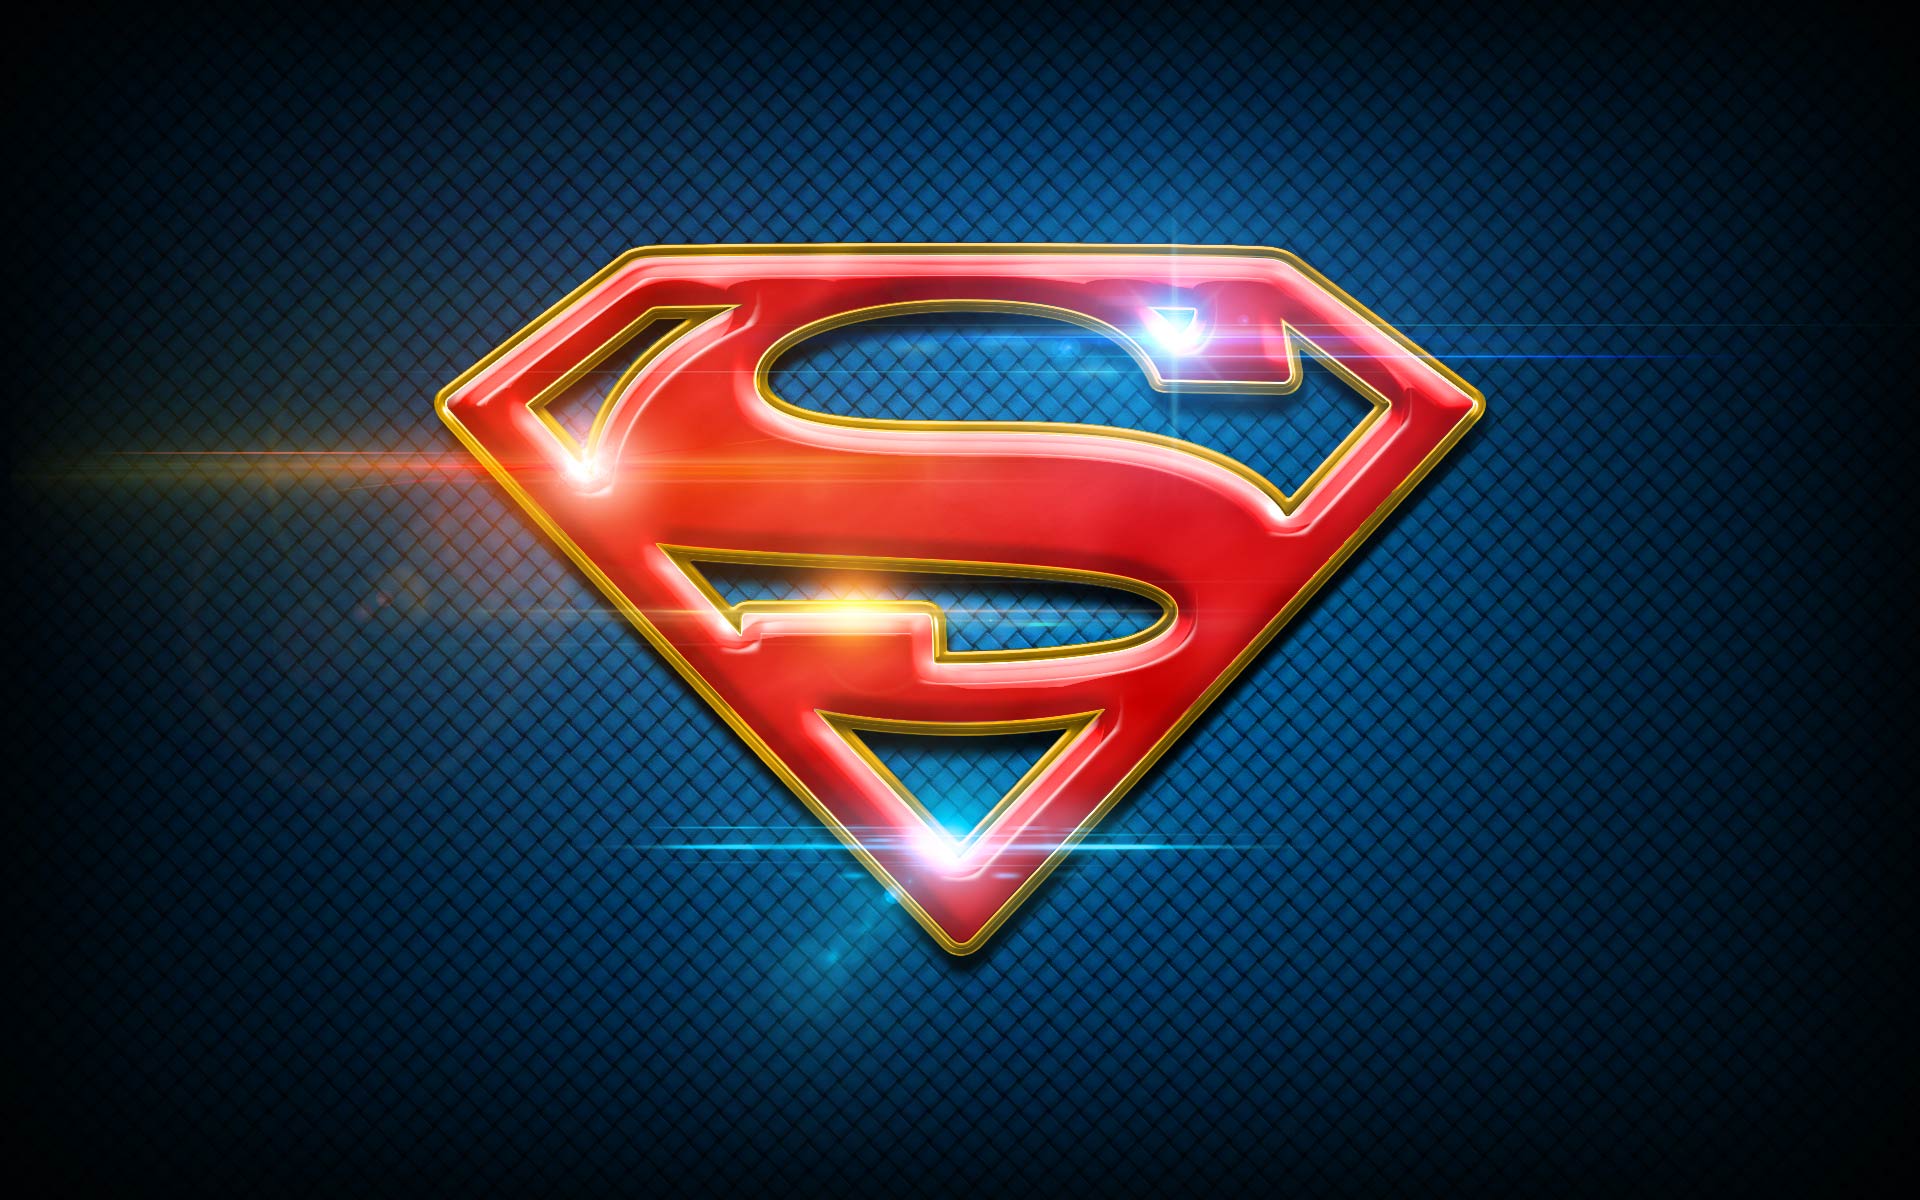 Supergirltv on colorful plastic look or cold hard steel like them feel free to use them as wallpapers httpstcodypfqk supergirl fanartfriday httpstcosdrghedq